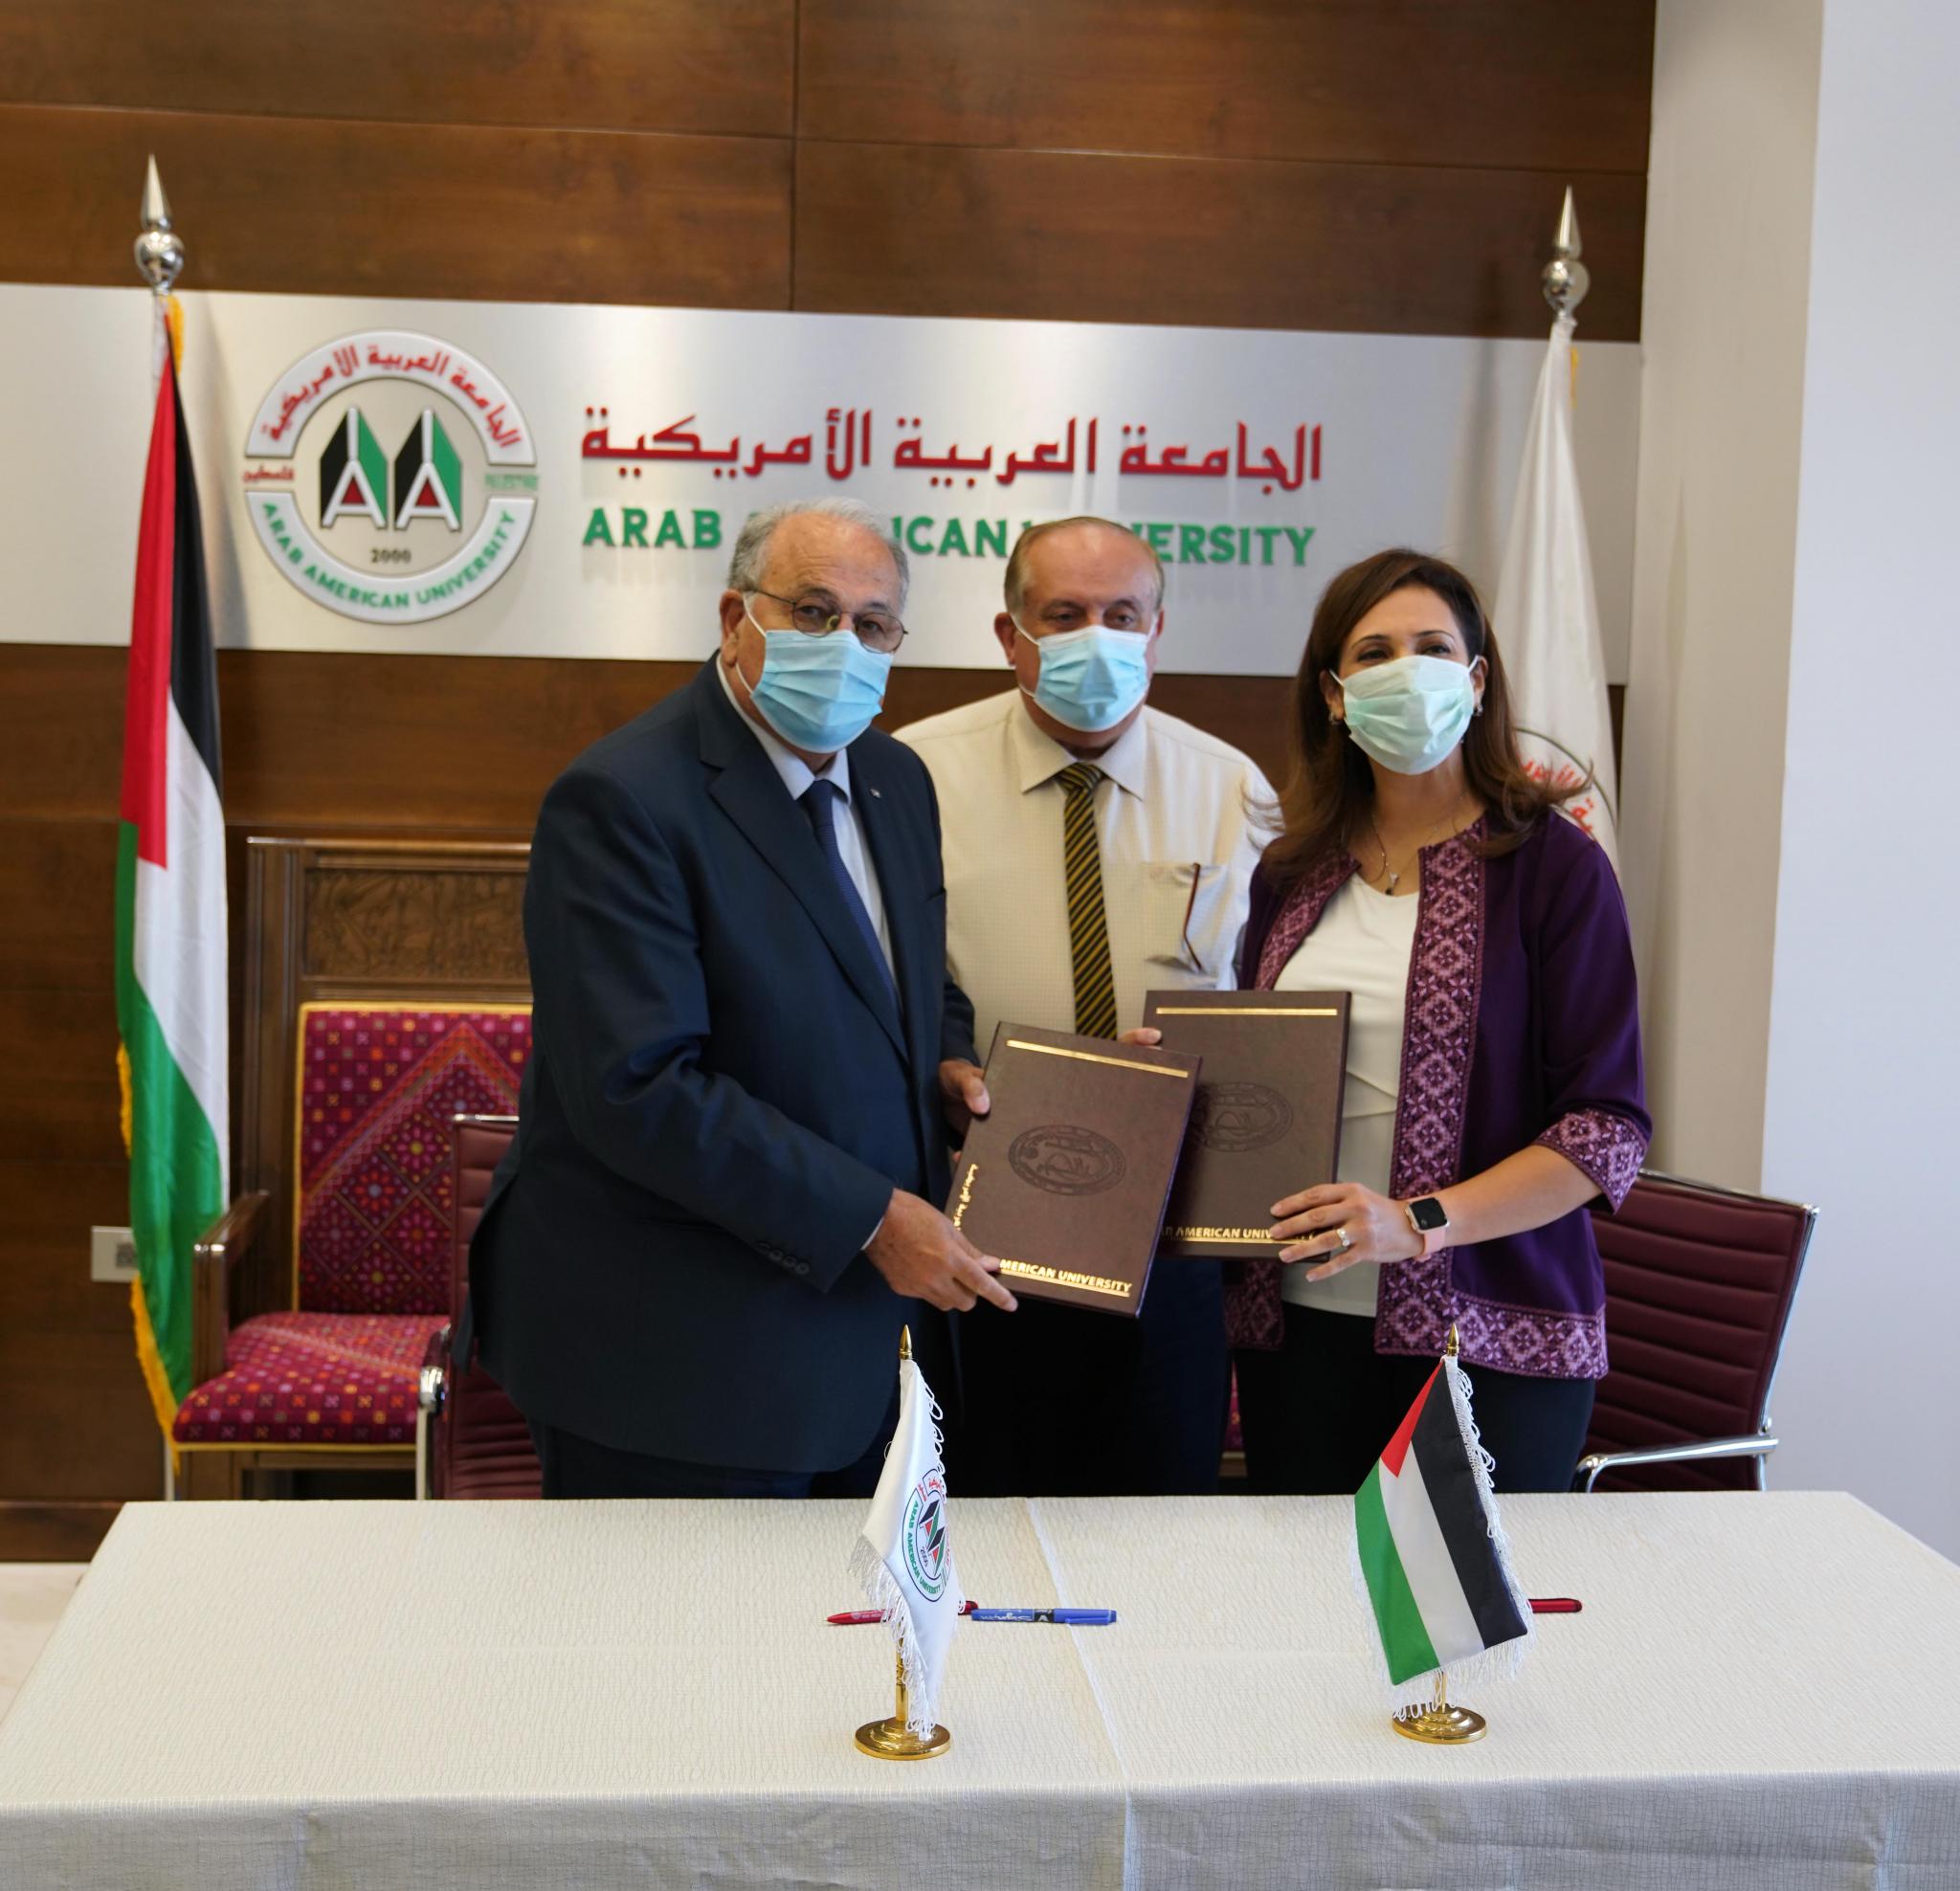 The Signing of an Agreement between AAUP and the Palestinian Central Bureau of Statistics to Start the BA Program in "Statistics and Data Sciences"